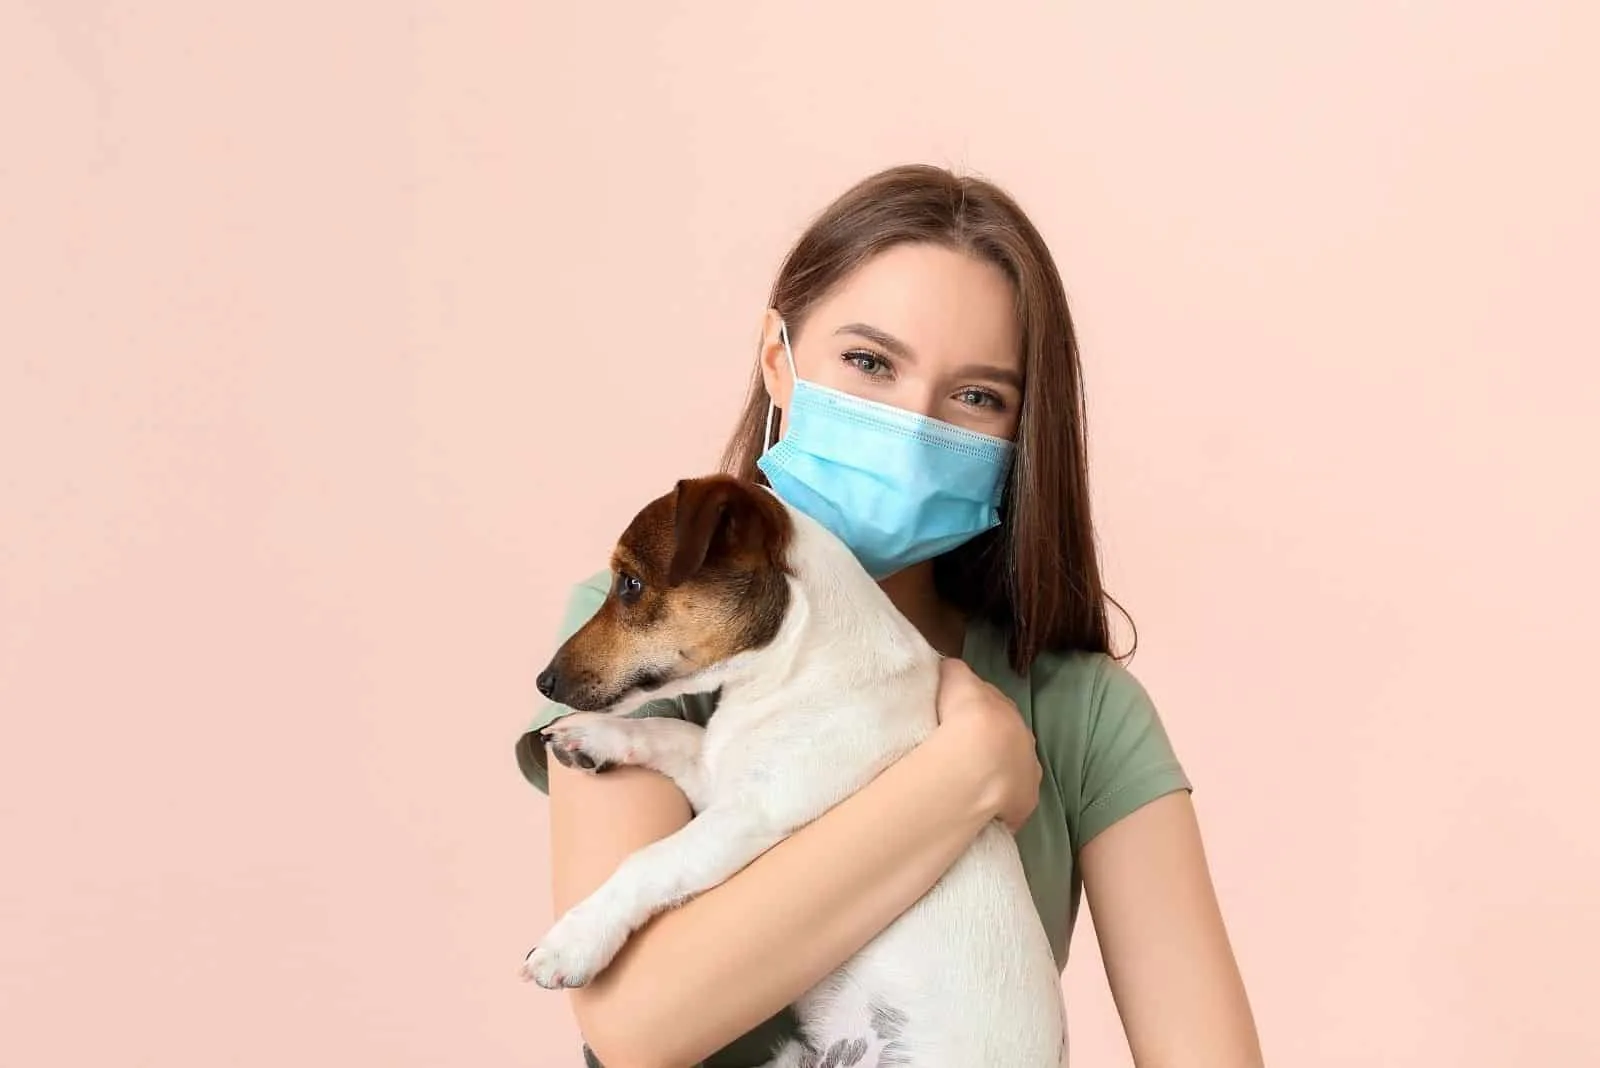 woman with a face mask hugging a dog in pink background 